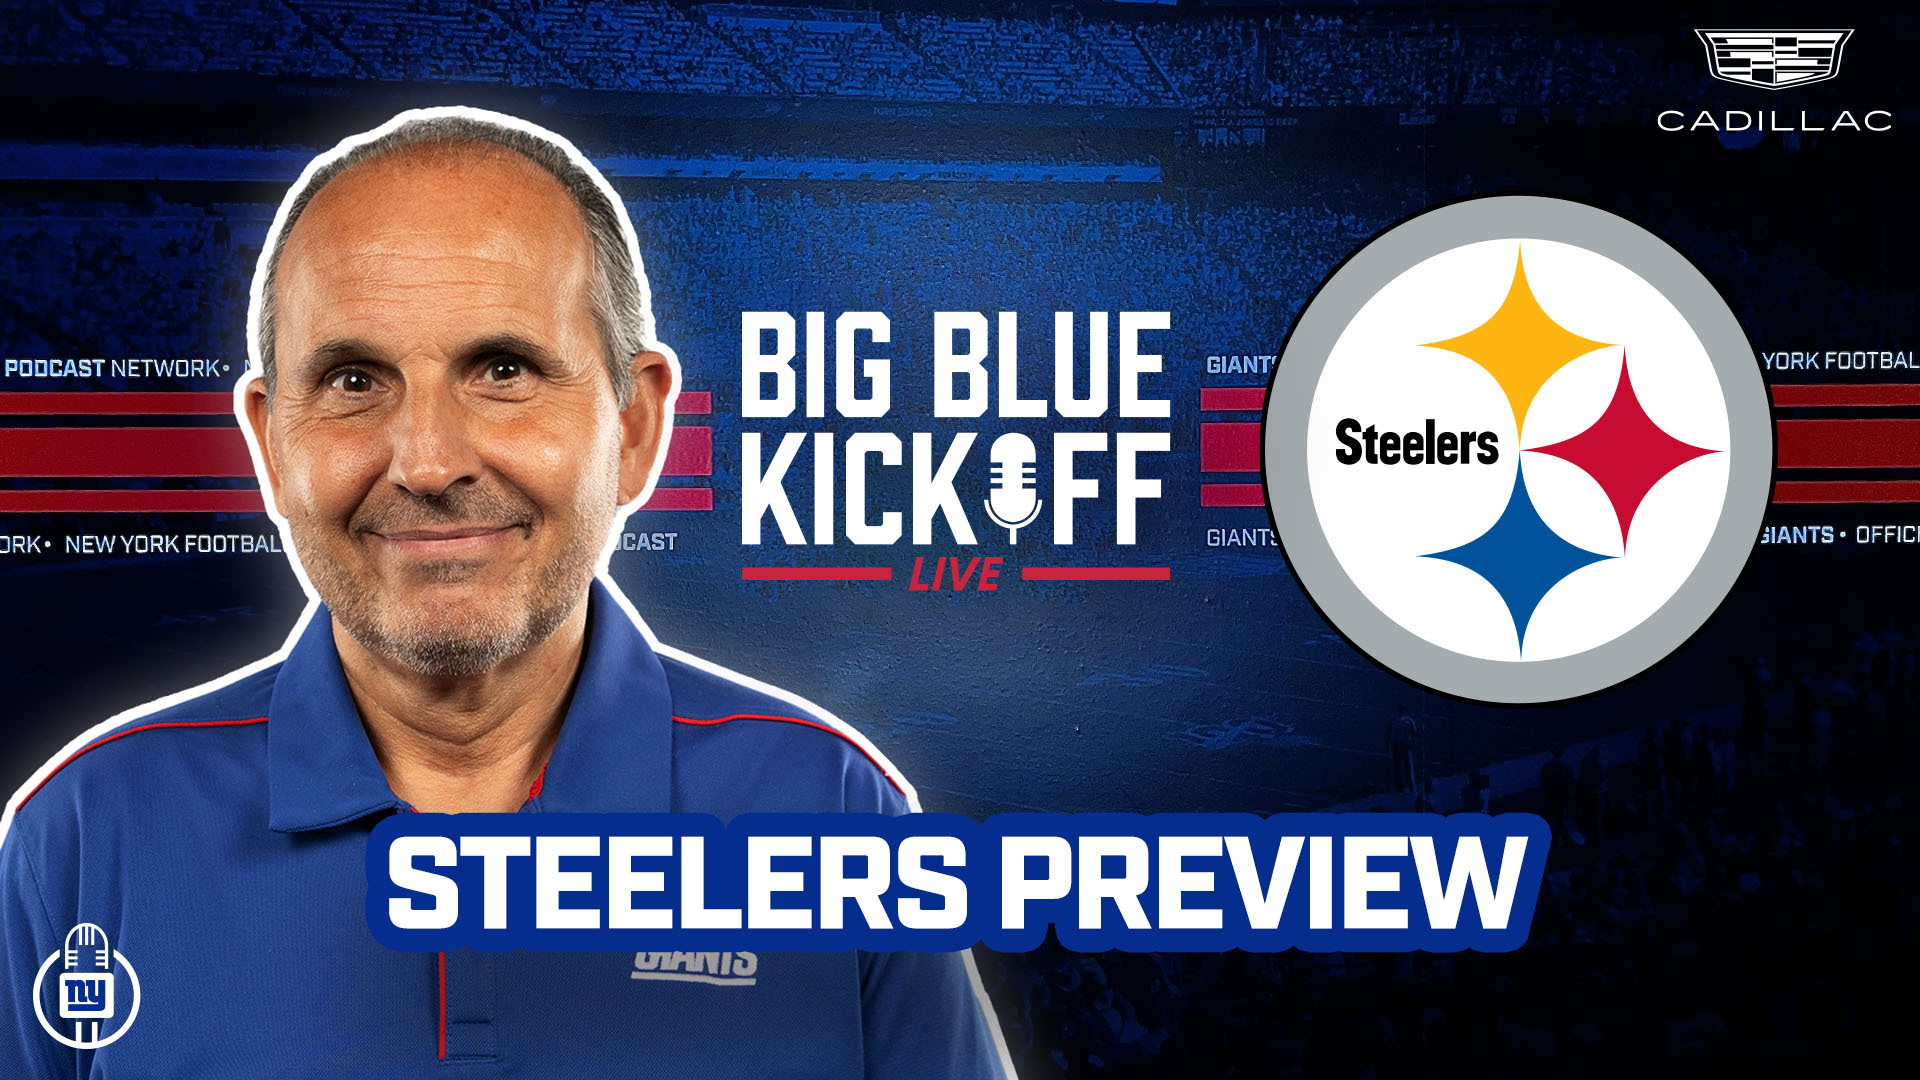 Big Blue Kickoff Live 7/8 | Steelers Preview